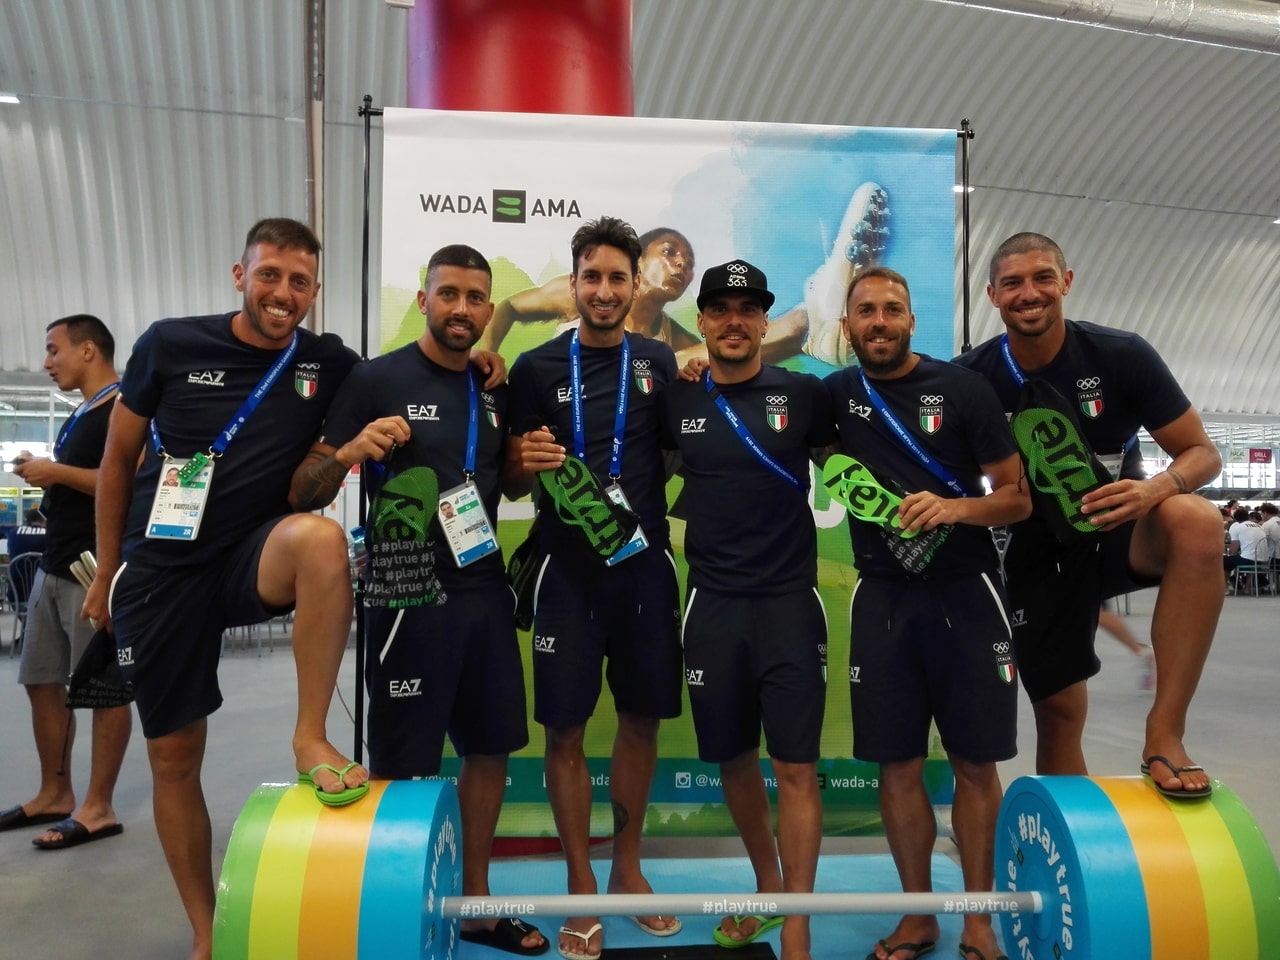 "Outreach" at the II European Games 2019 in Minsk.